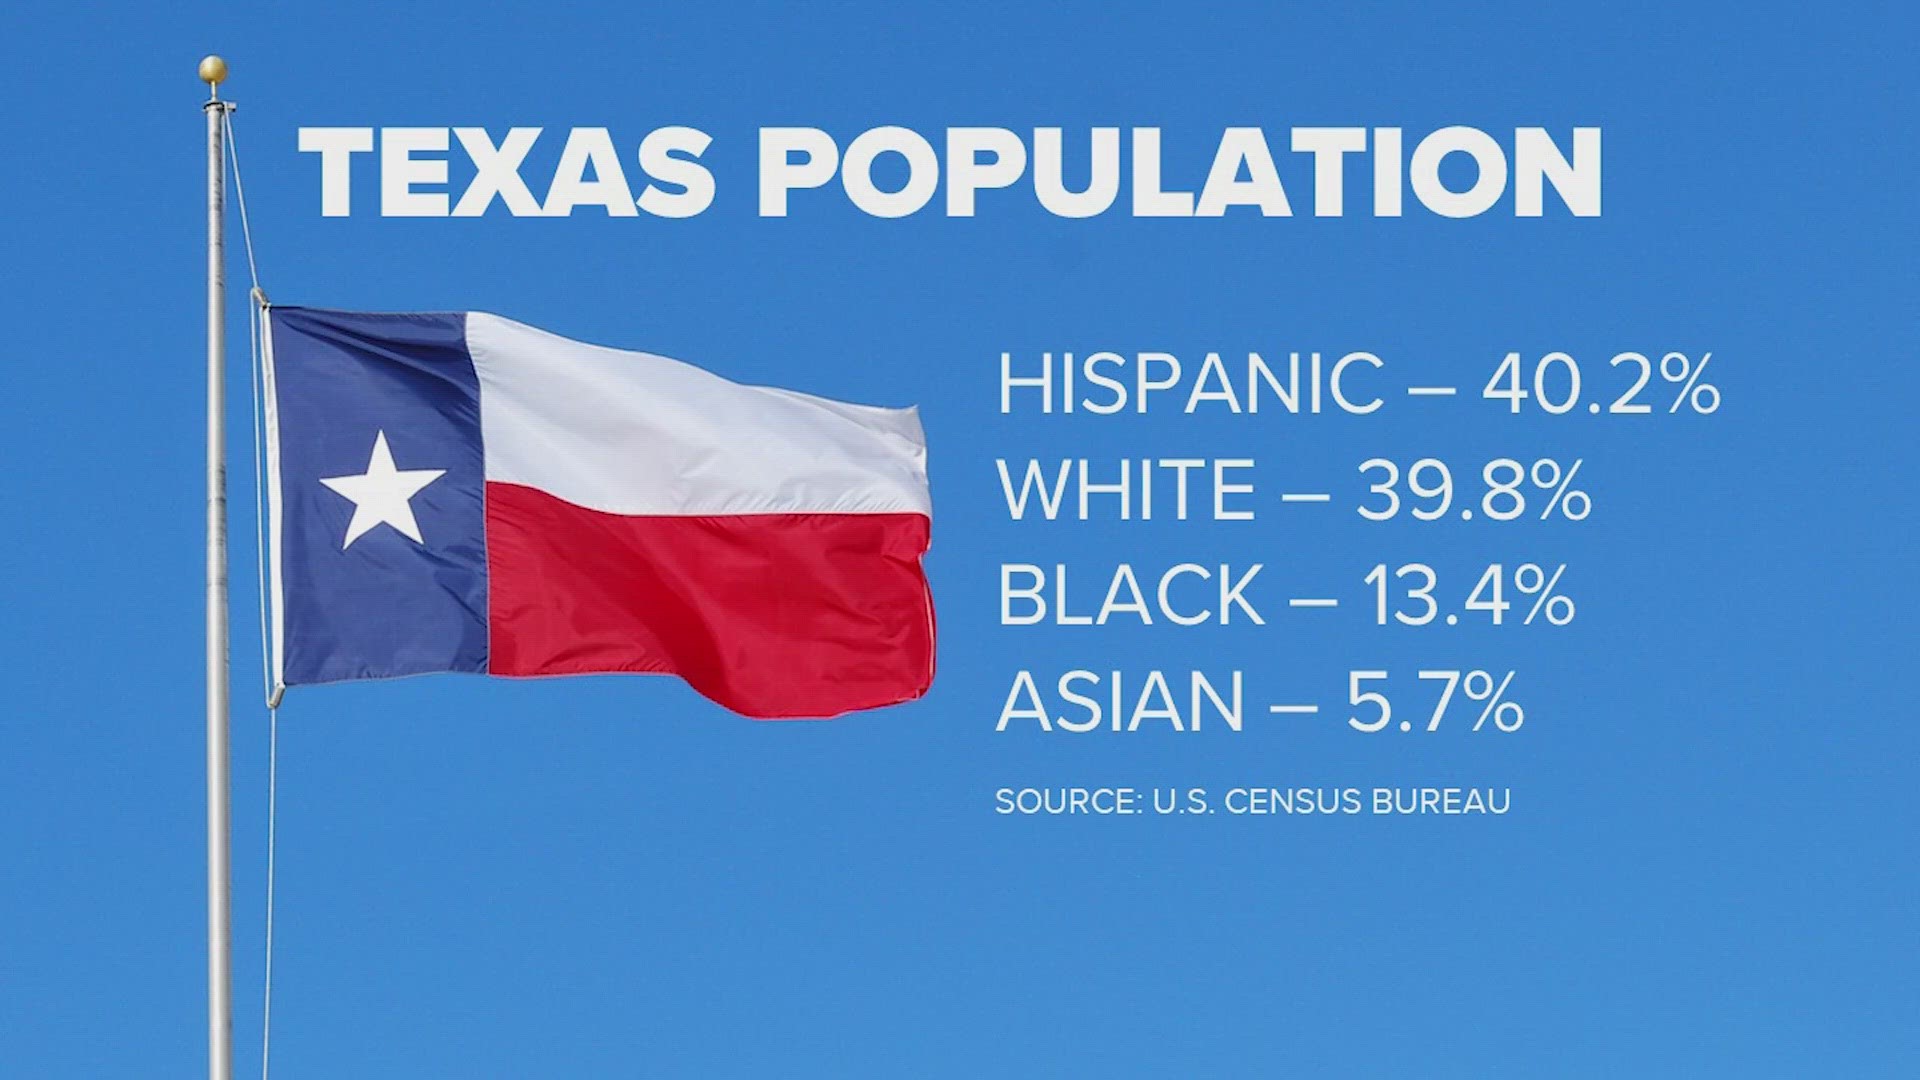 Researchers said the data doesn't change much for cities like Houston, where Hispanics have held the largest portion of the population for around a decade.